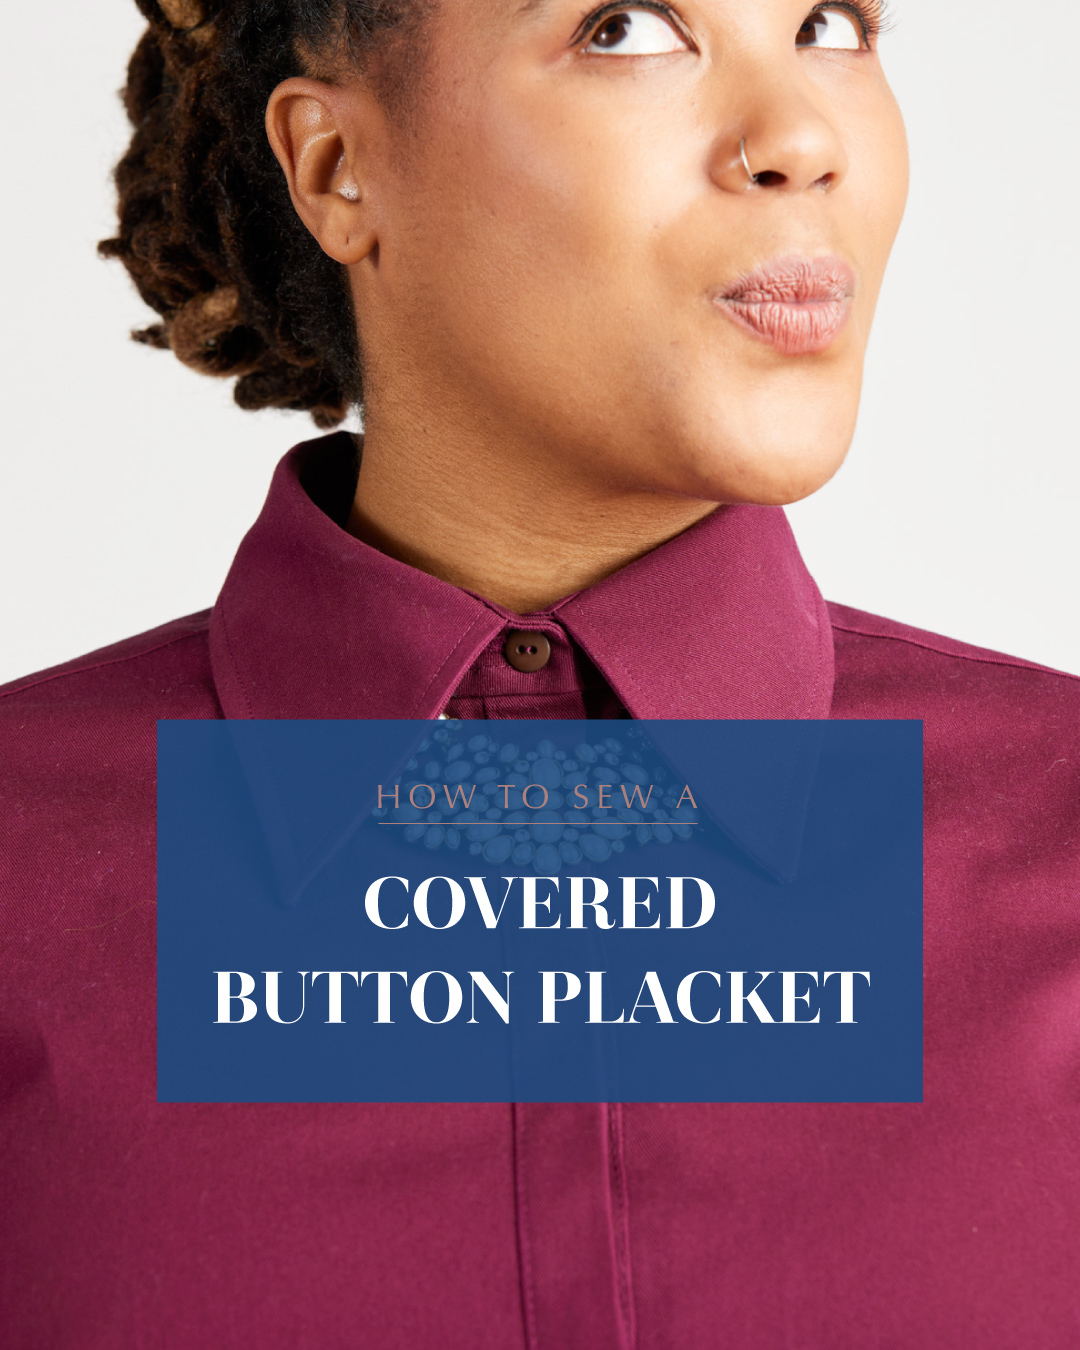 How to sew a covered button placket